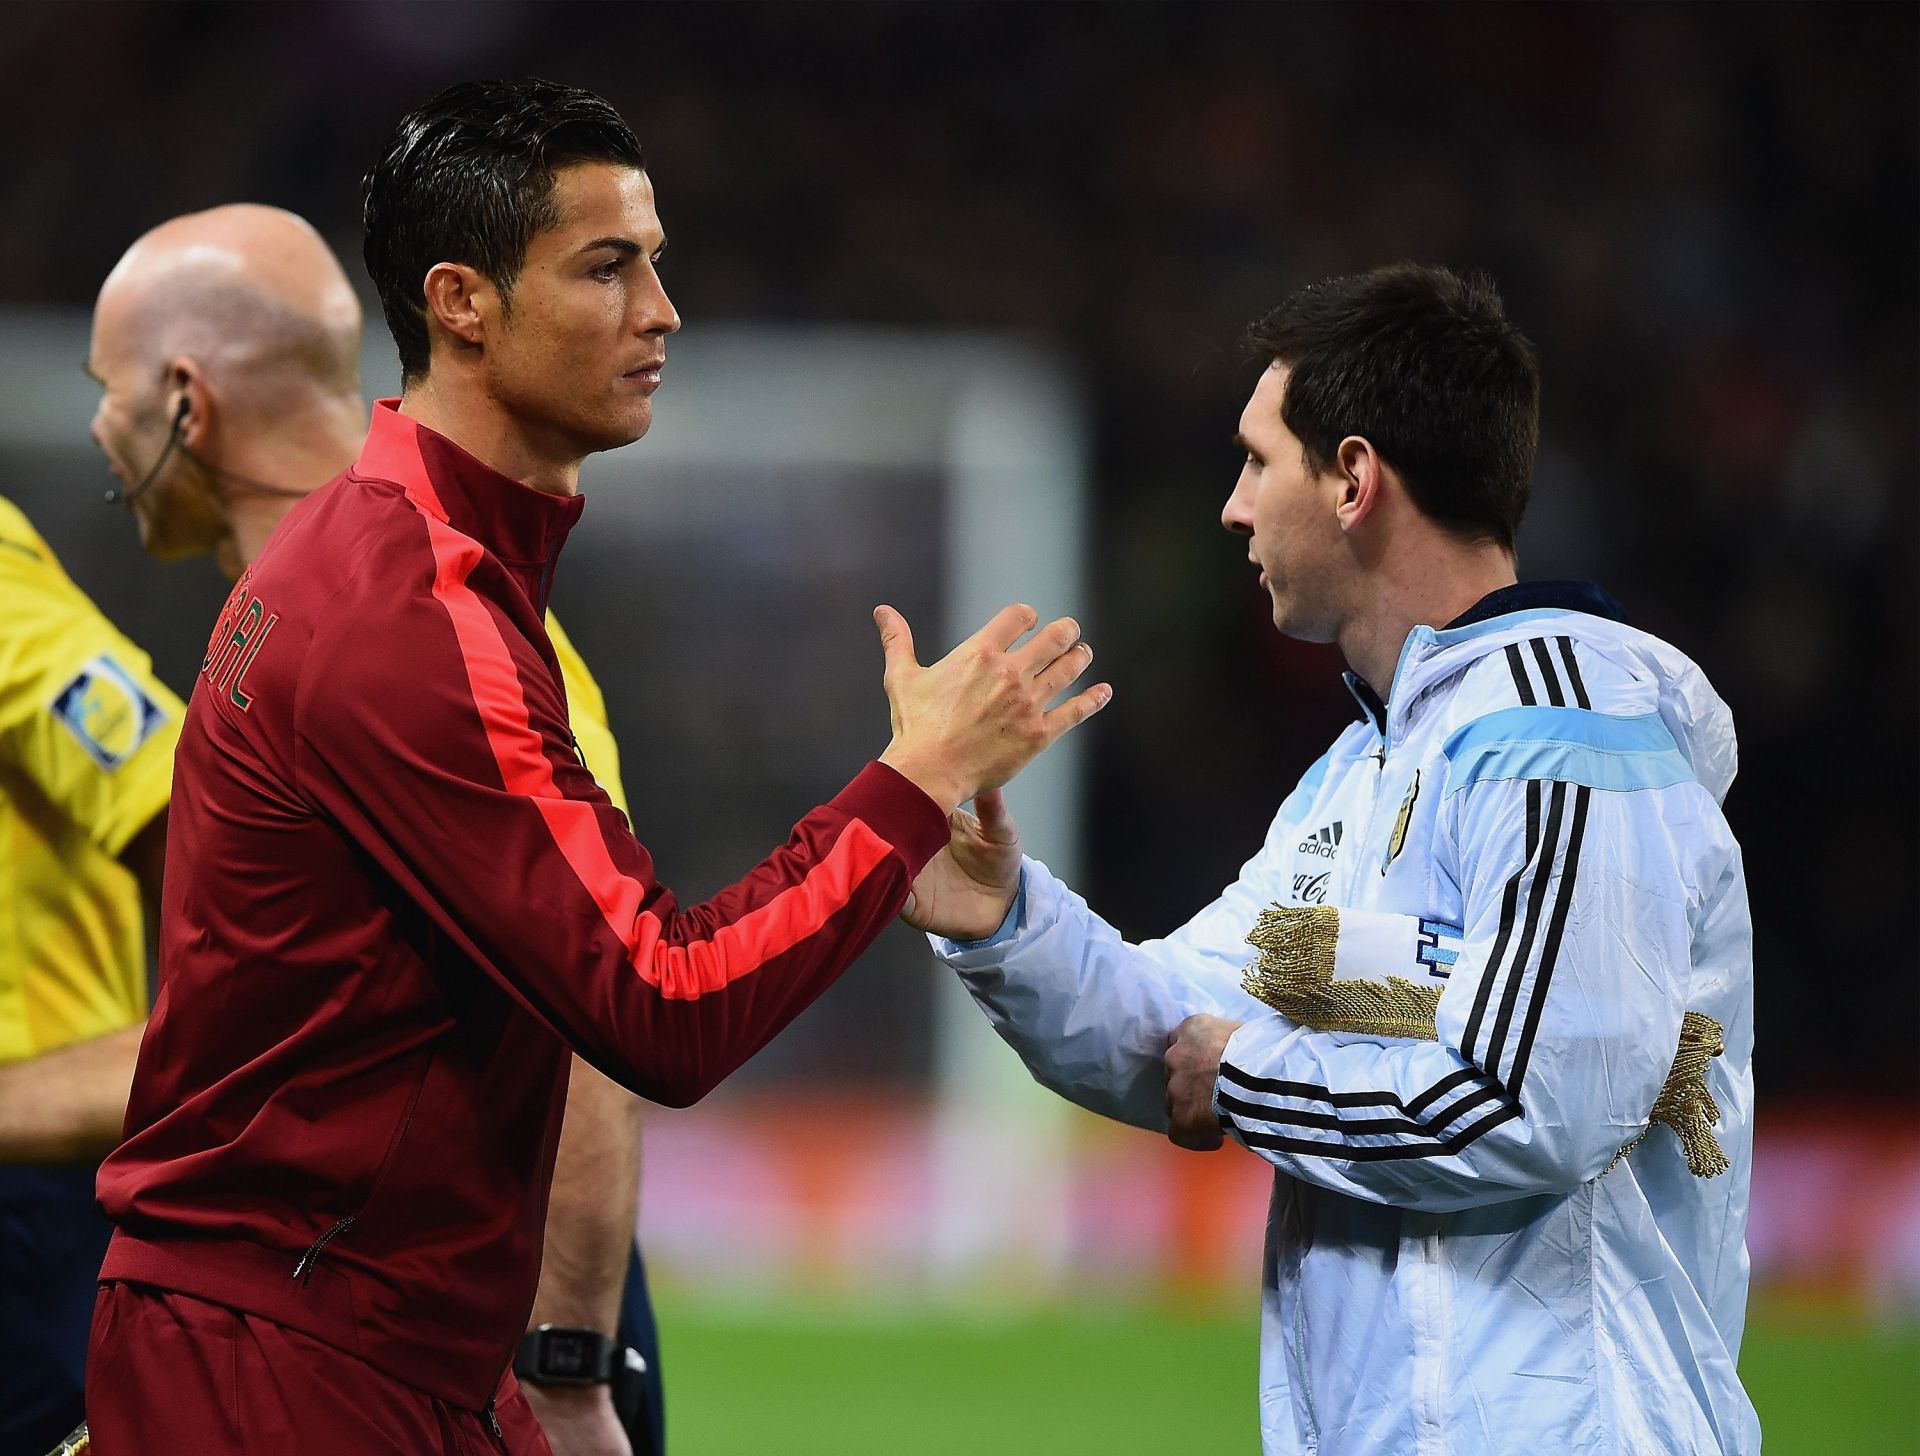 Argentina v Portugal - Lionel Messi and Cristiano Ronaldo will be determined to do well at the World Cup